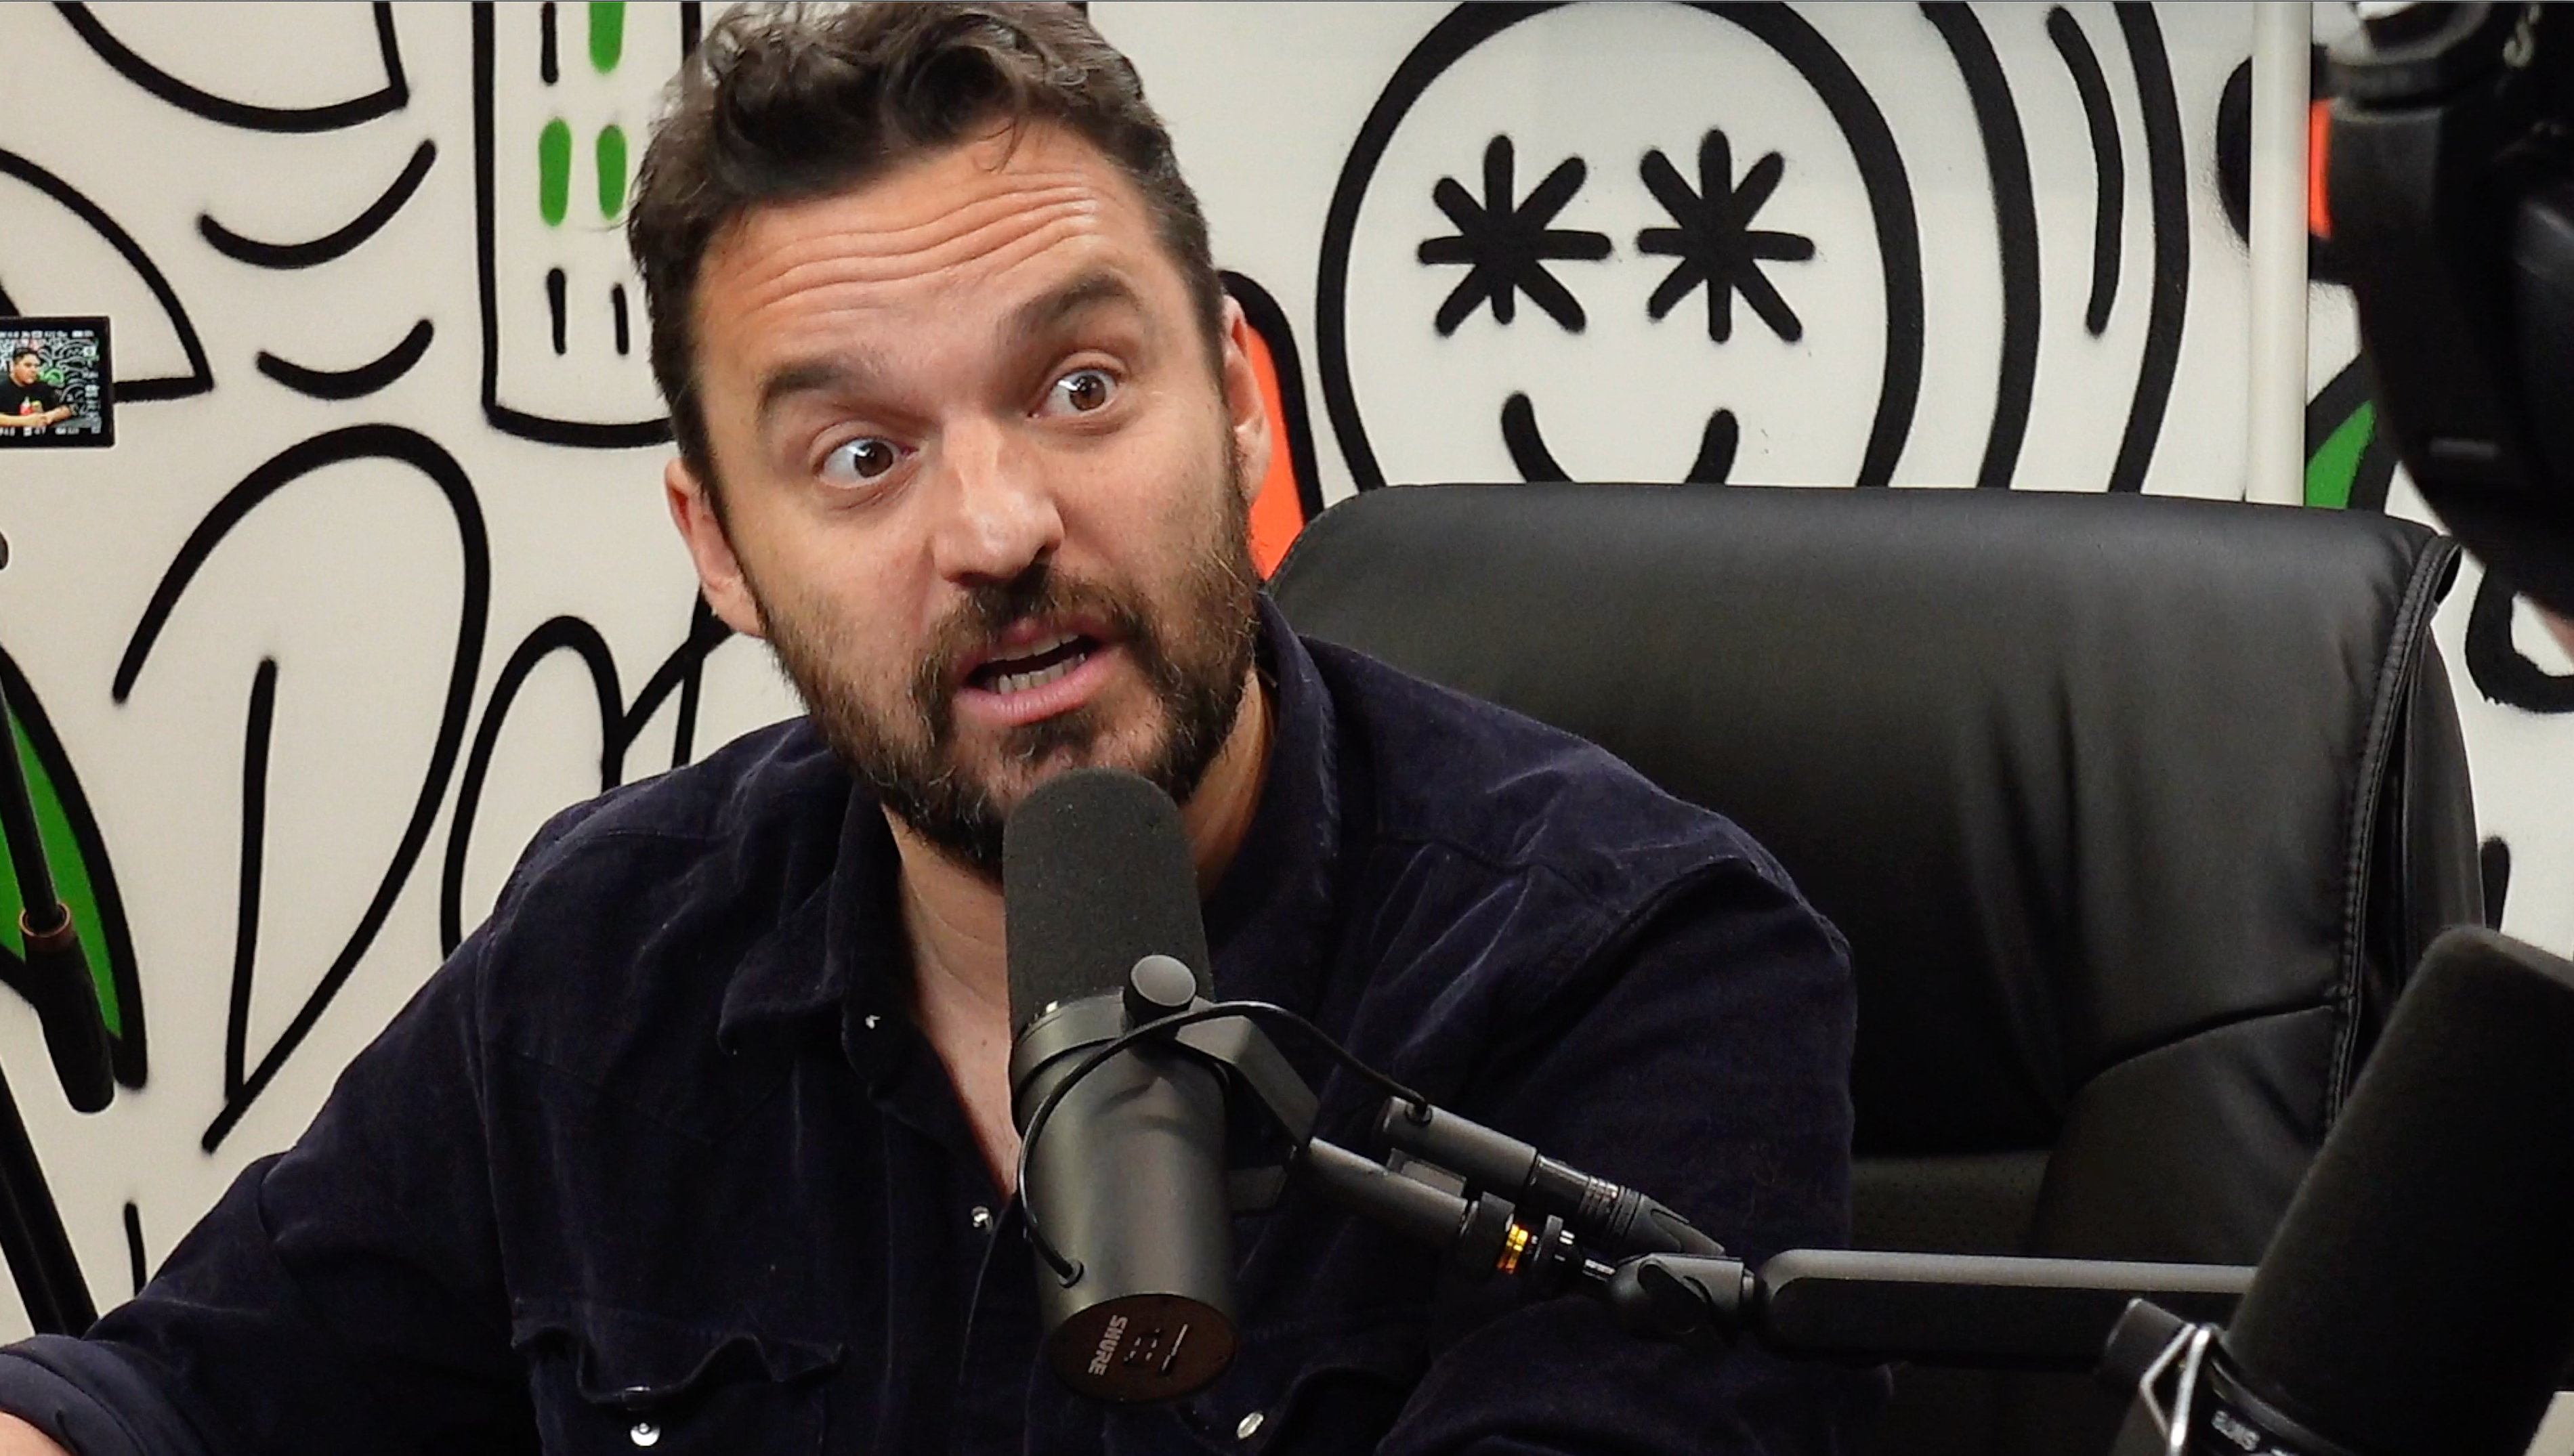 Super Viral: Jake Johnson's Wild Story on "DOPE AS USUAL"